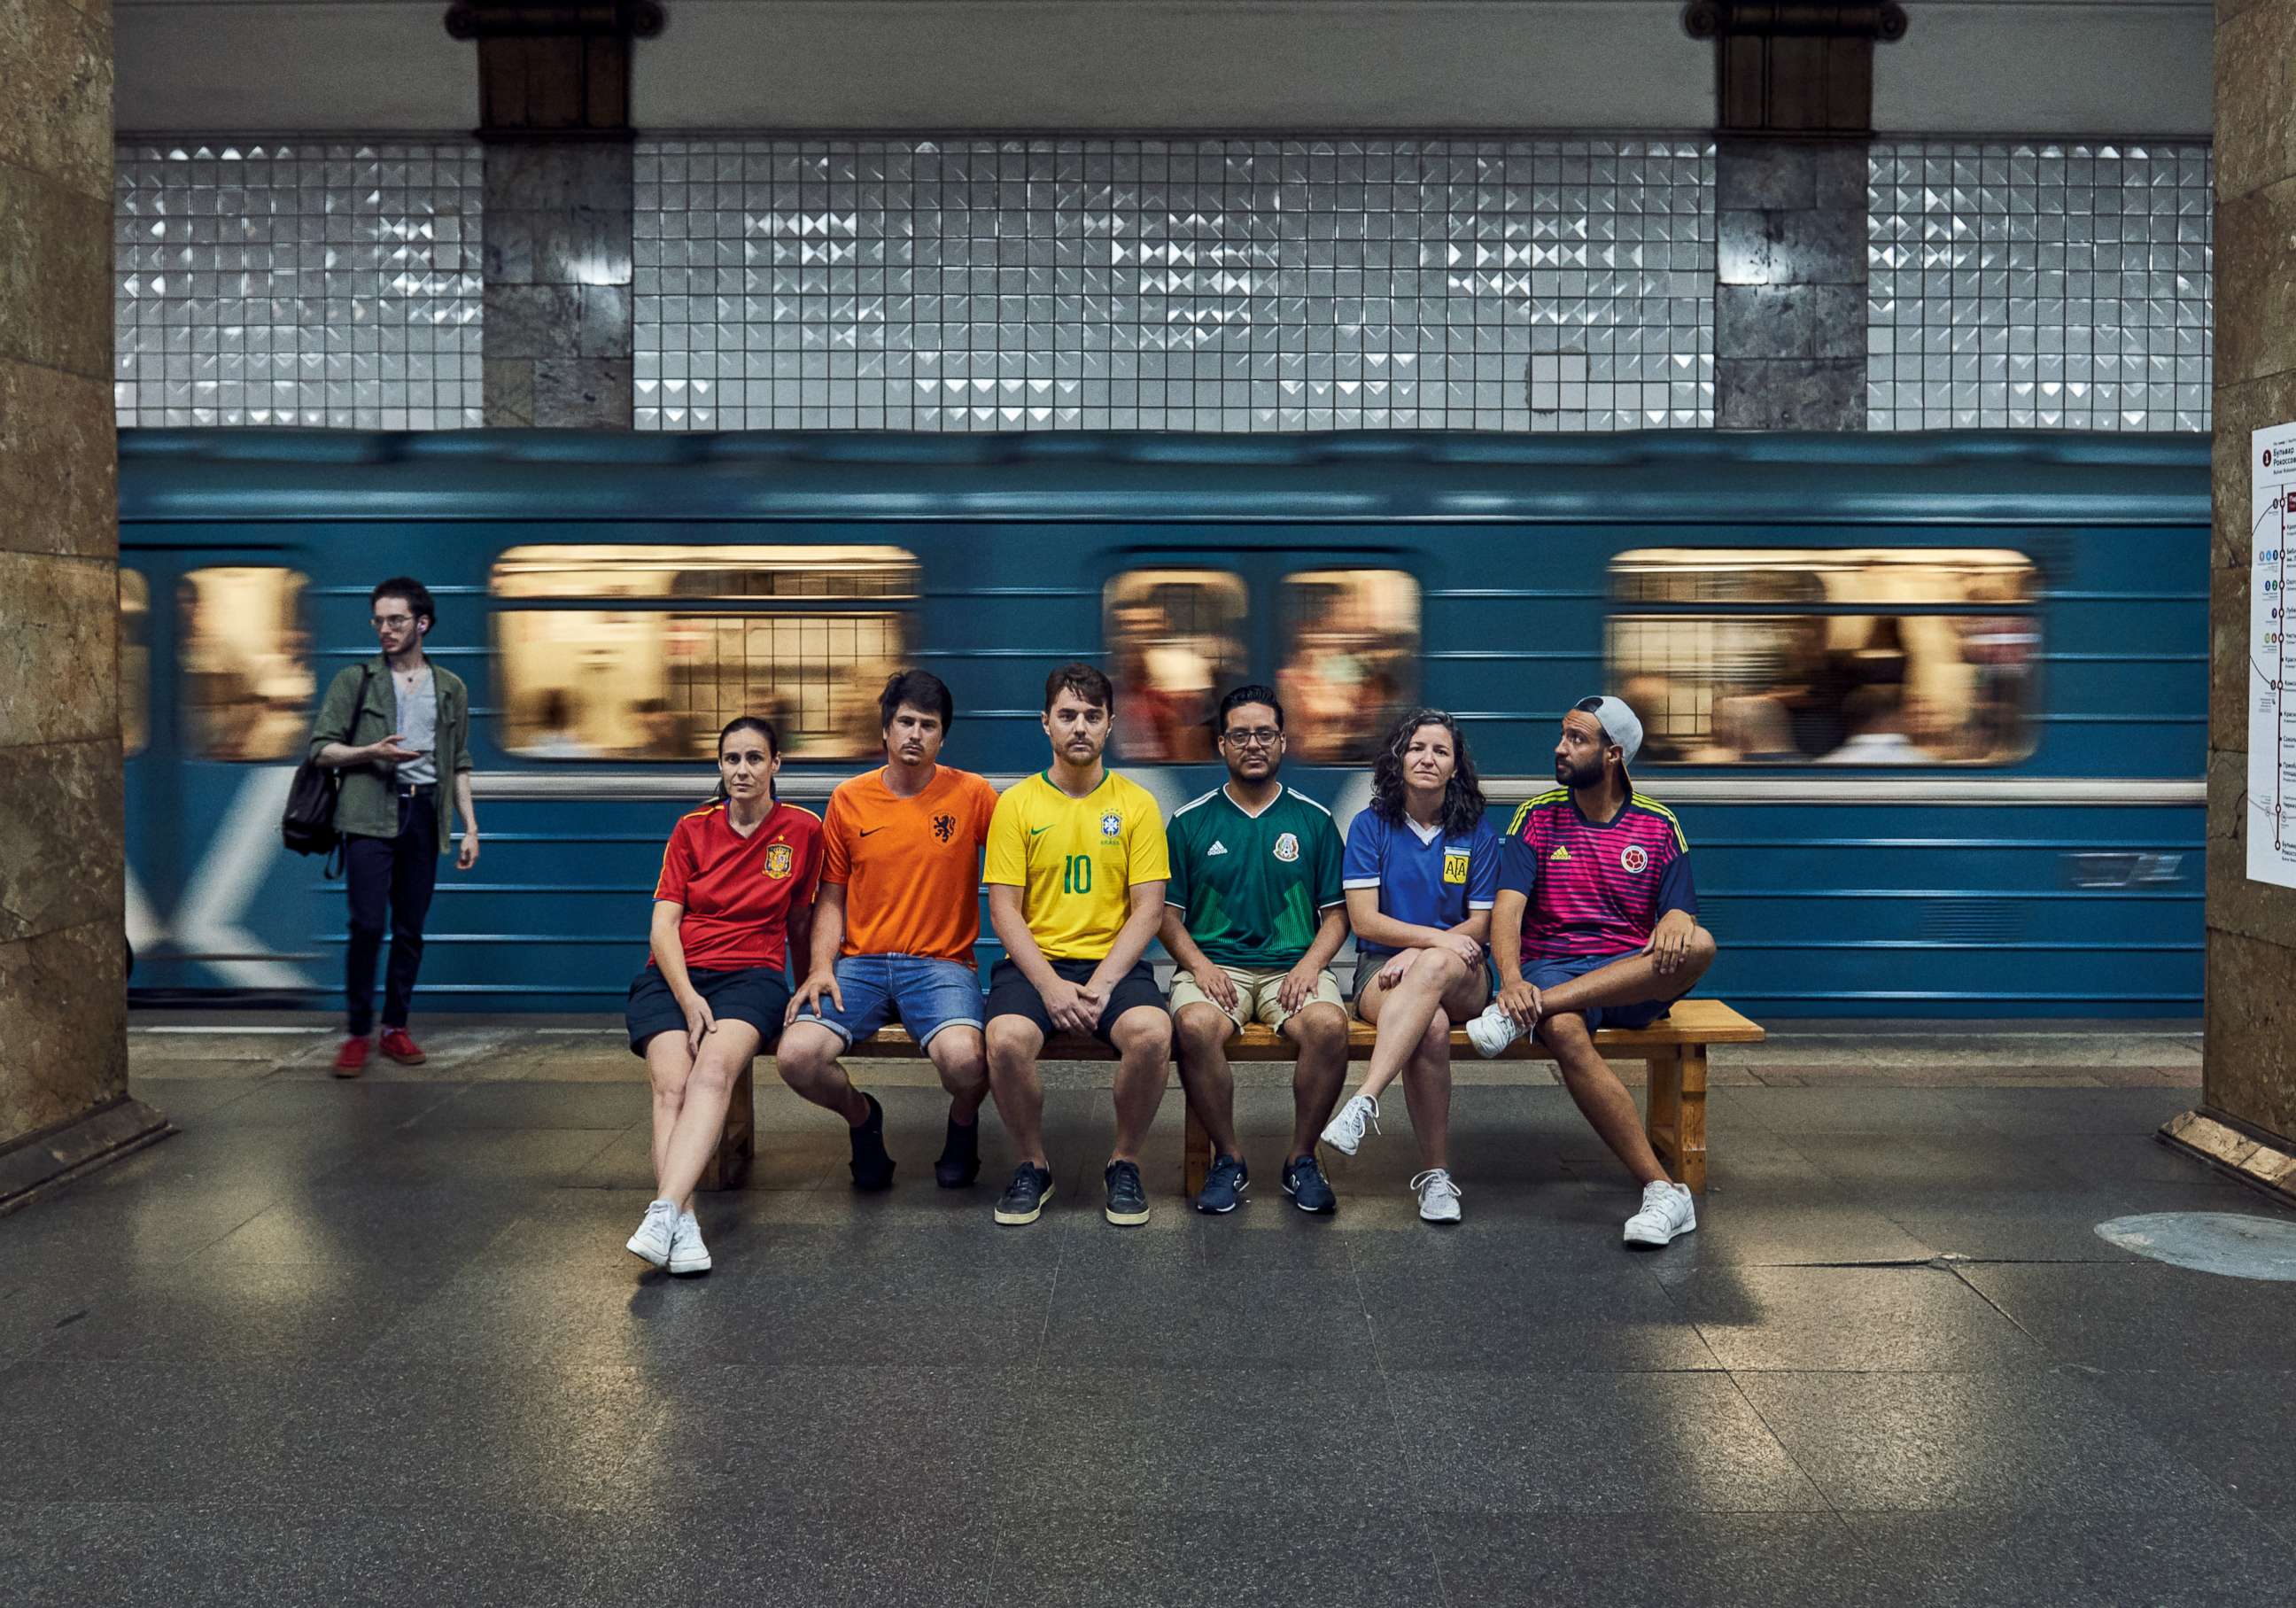 PHOTO: Six people subtly protested Russia's "anti-gay propaganda law" by wearing the colors of the rainbow pride flag during World Cup celebrations in Moscow.